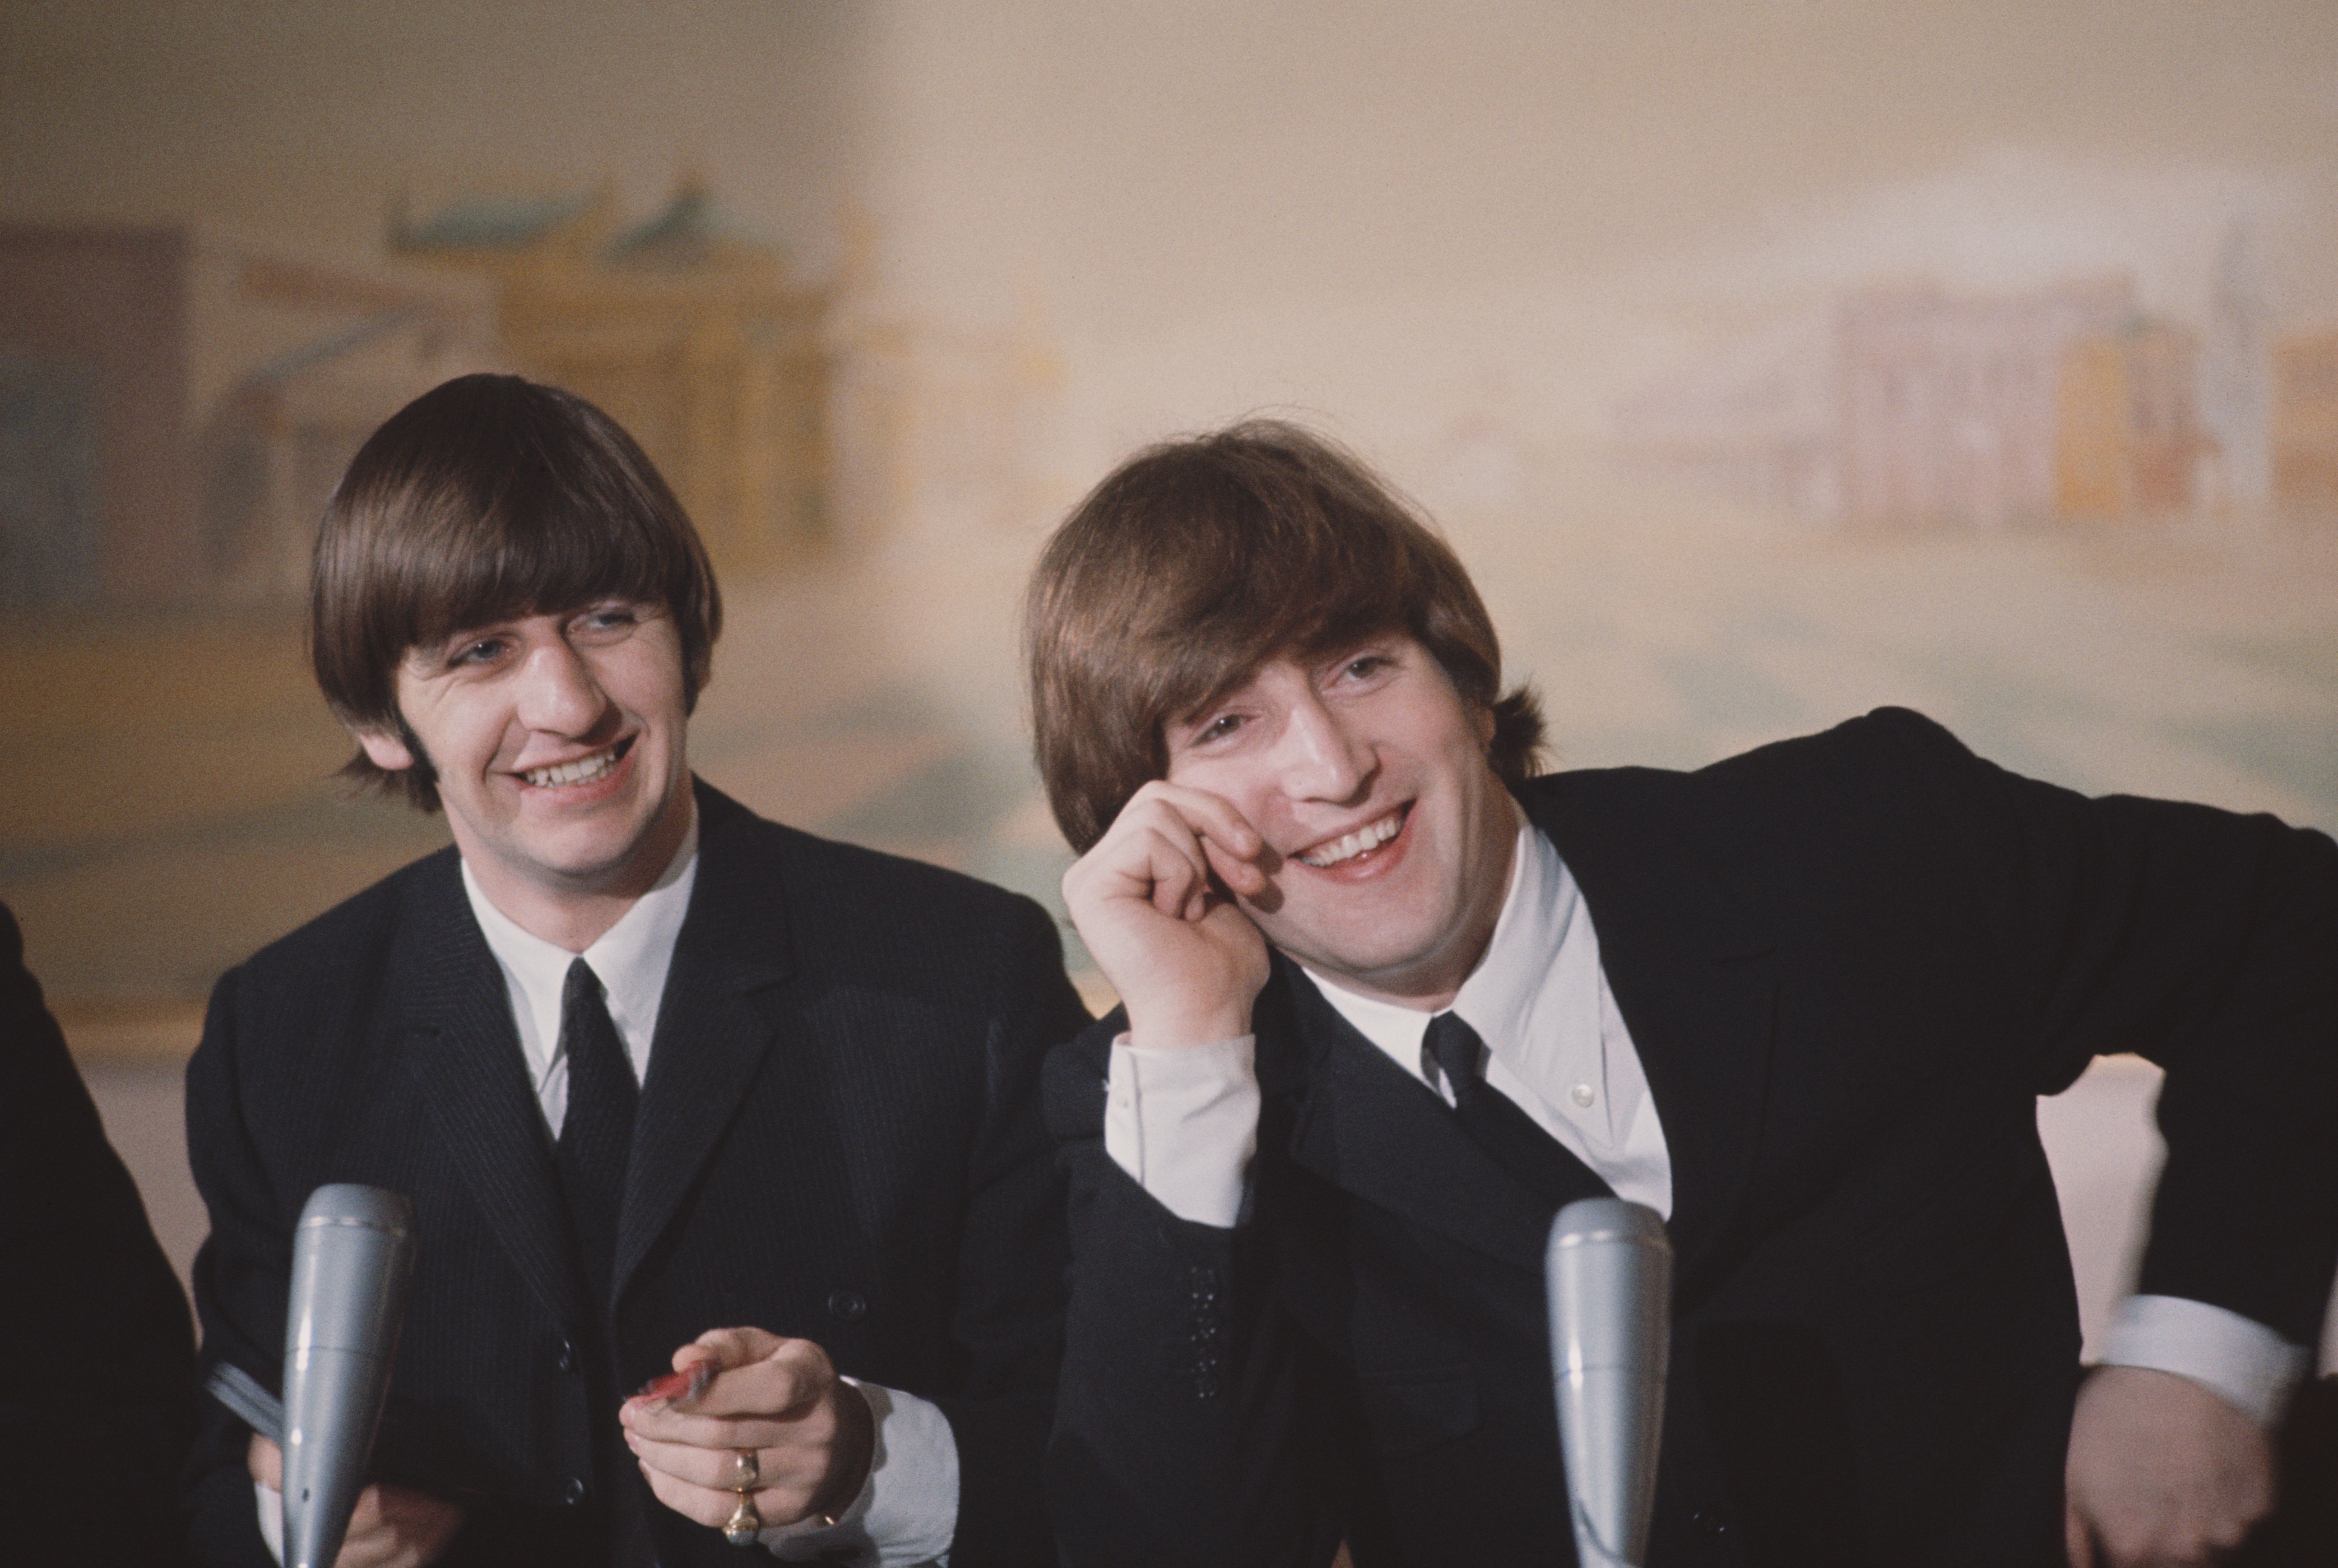 Ringo Starr and John Lennon at a press reception in the downstairs bar of the Saville Theatre in London on October 26, 1965. | Photo: Getty Images